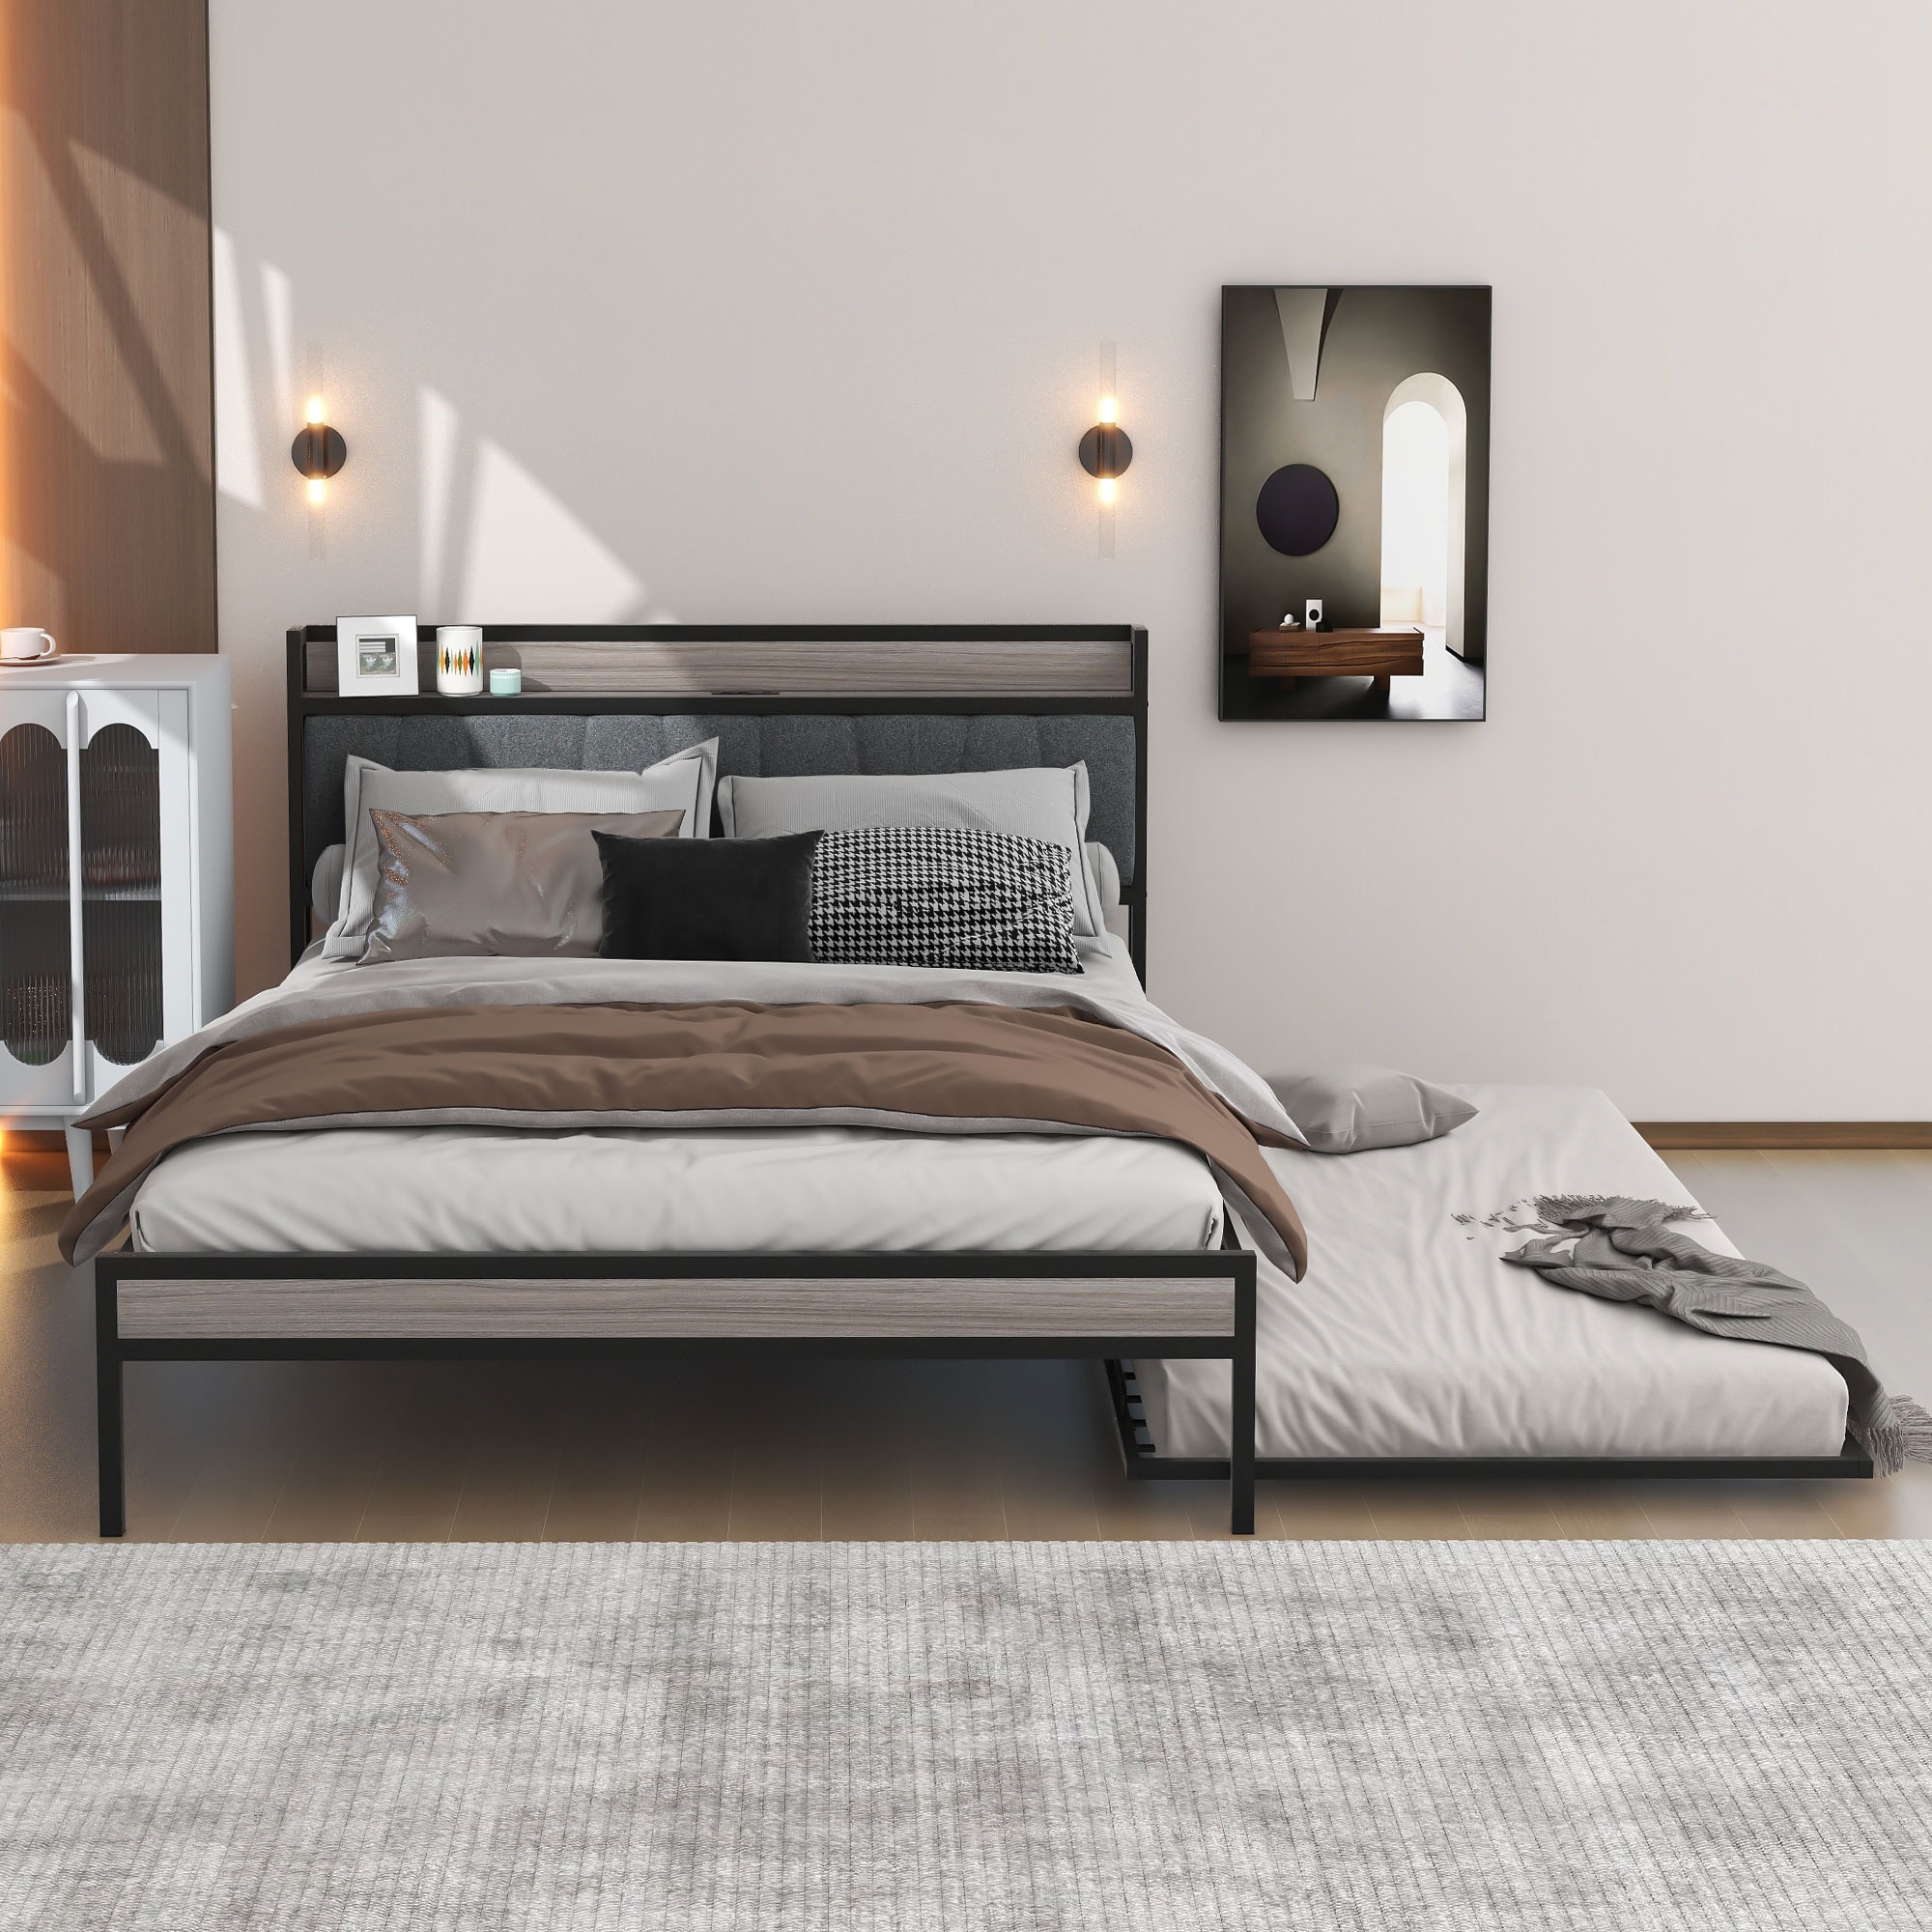 Queen Modern and Rustic Metal Platform Bed Frame With Twin Trundle and Upholstered Headboard  Black